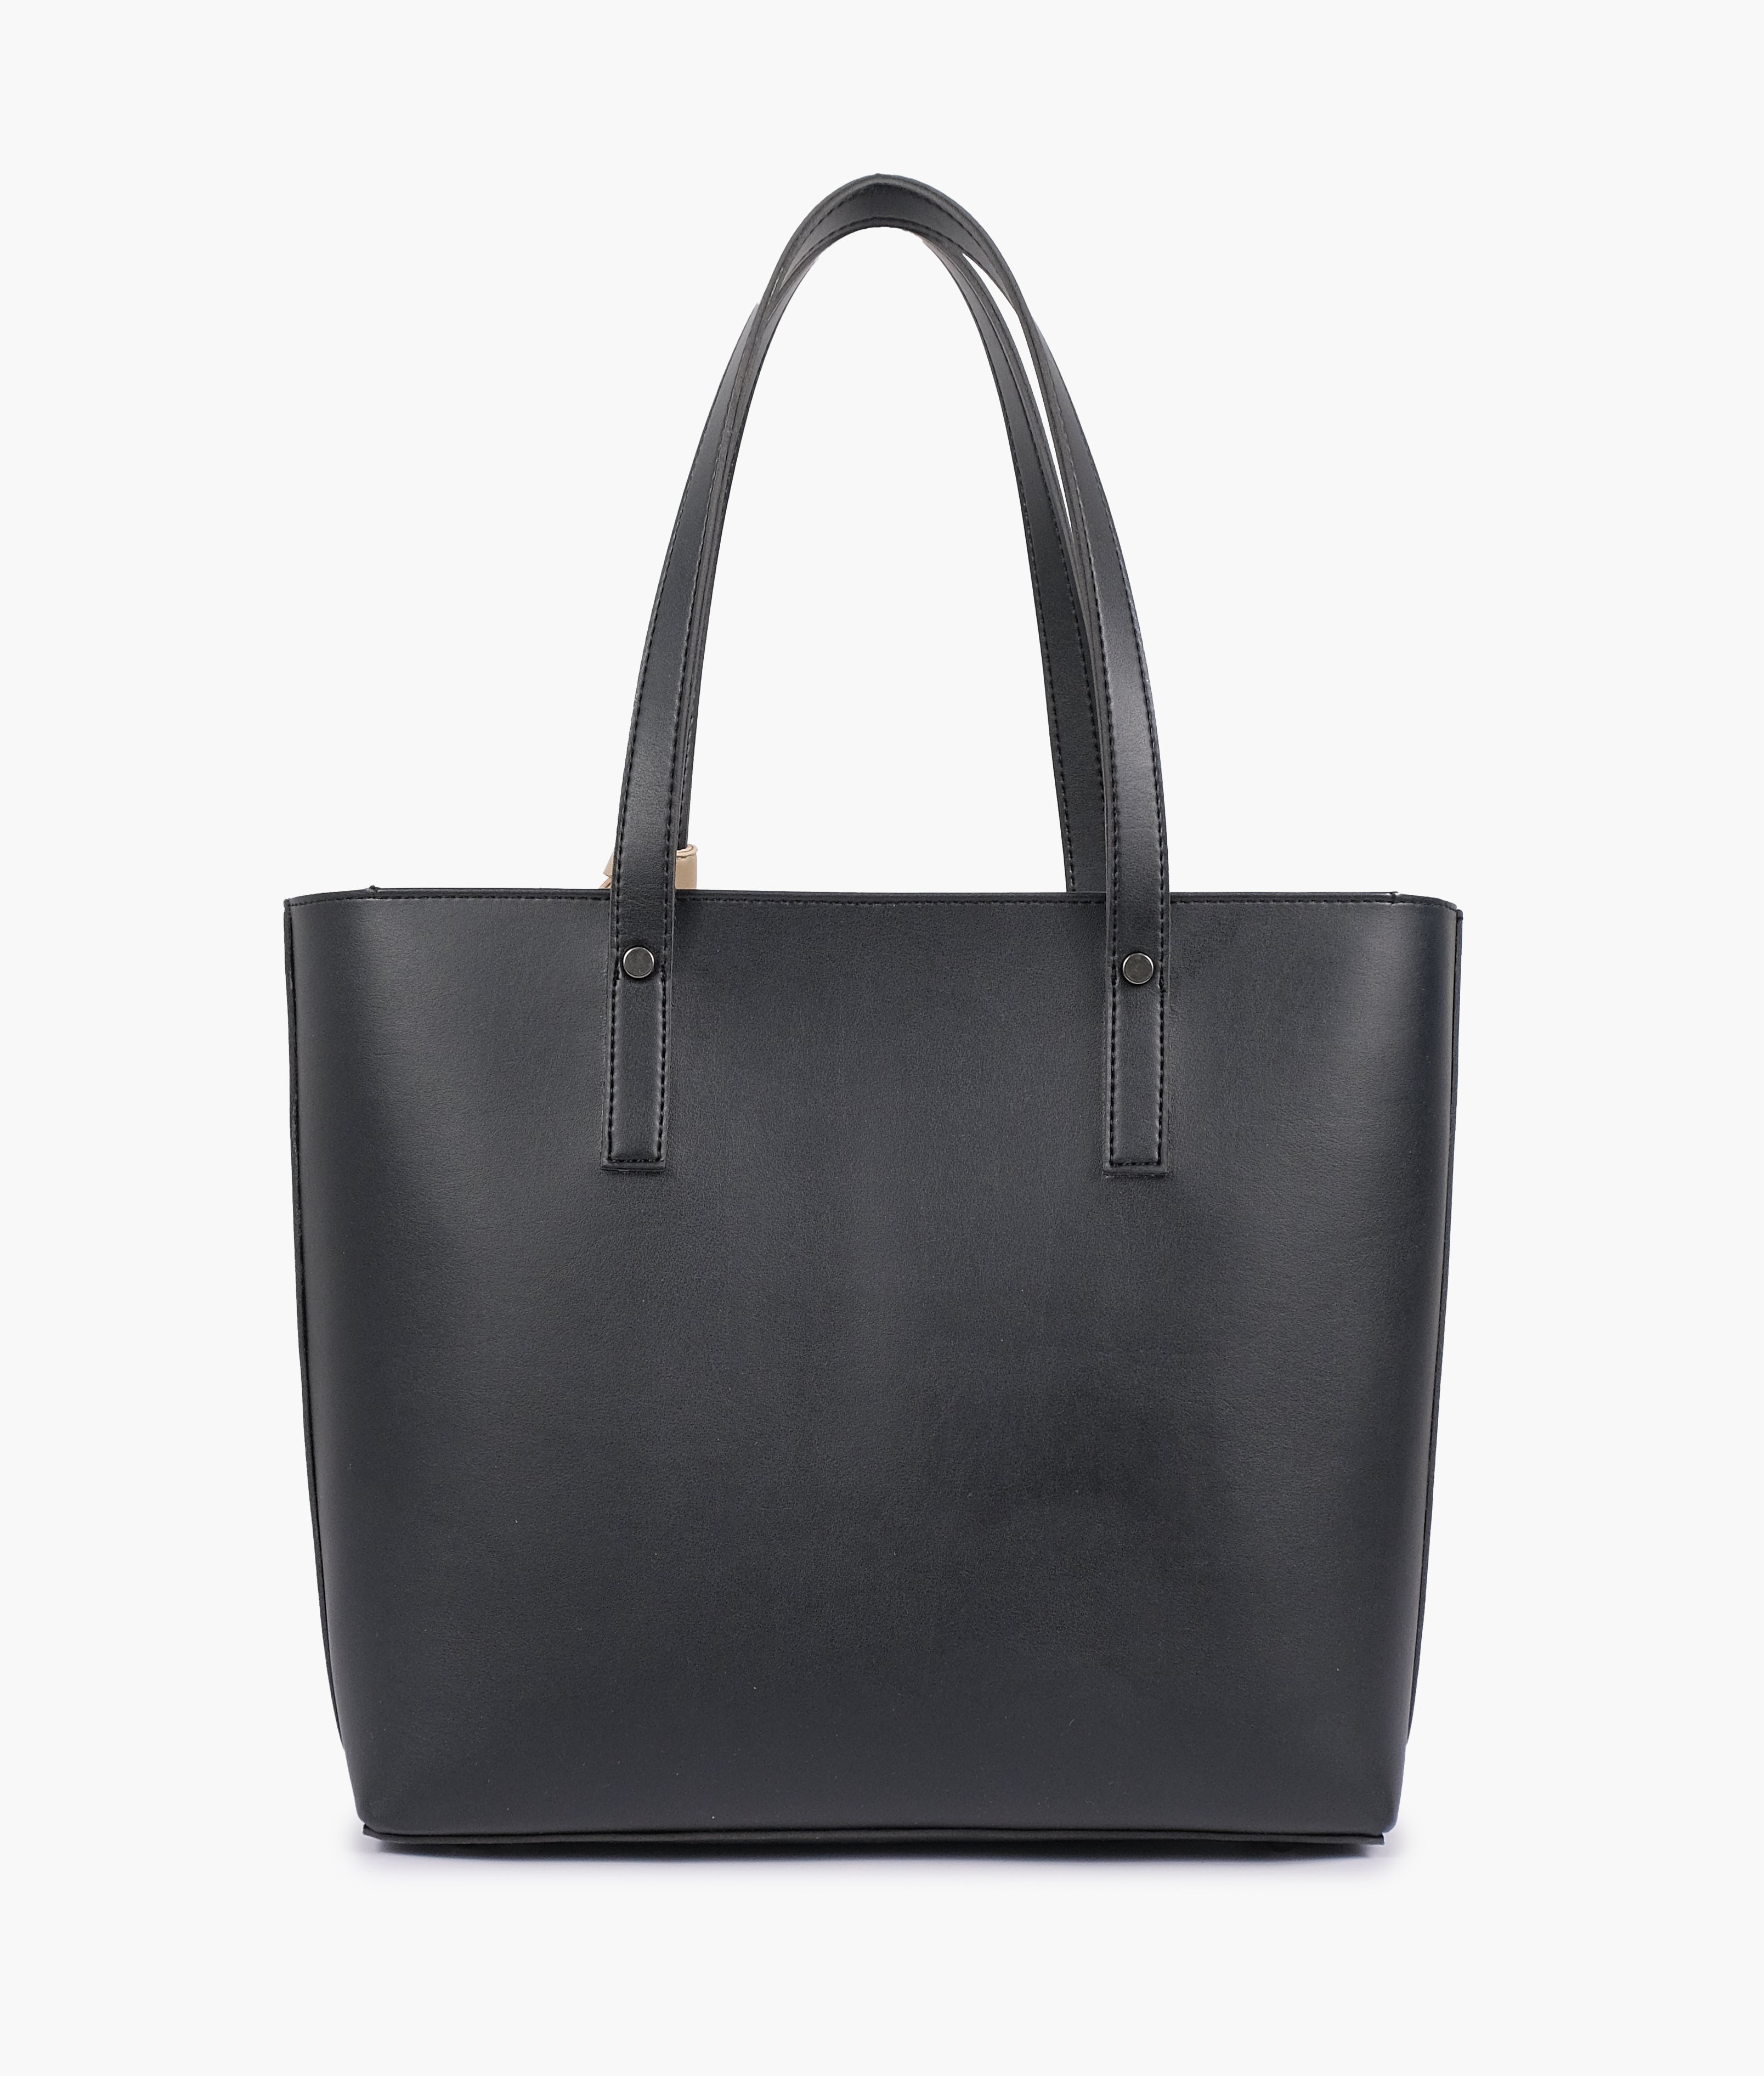 Black tote bag with detachable pouch – RTW Creation